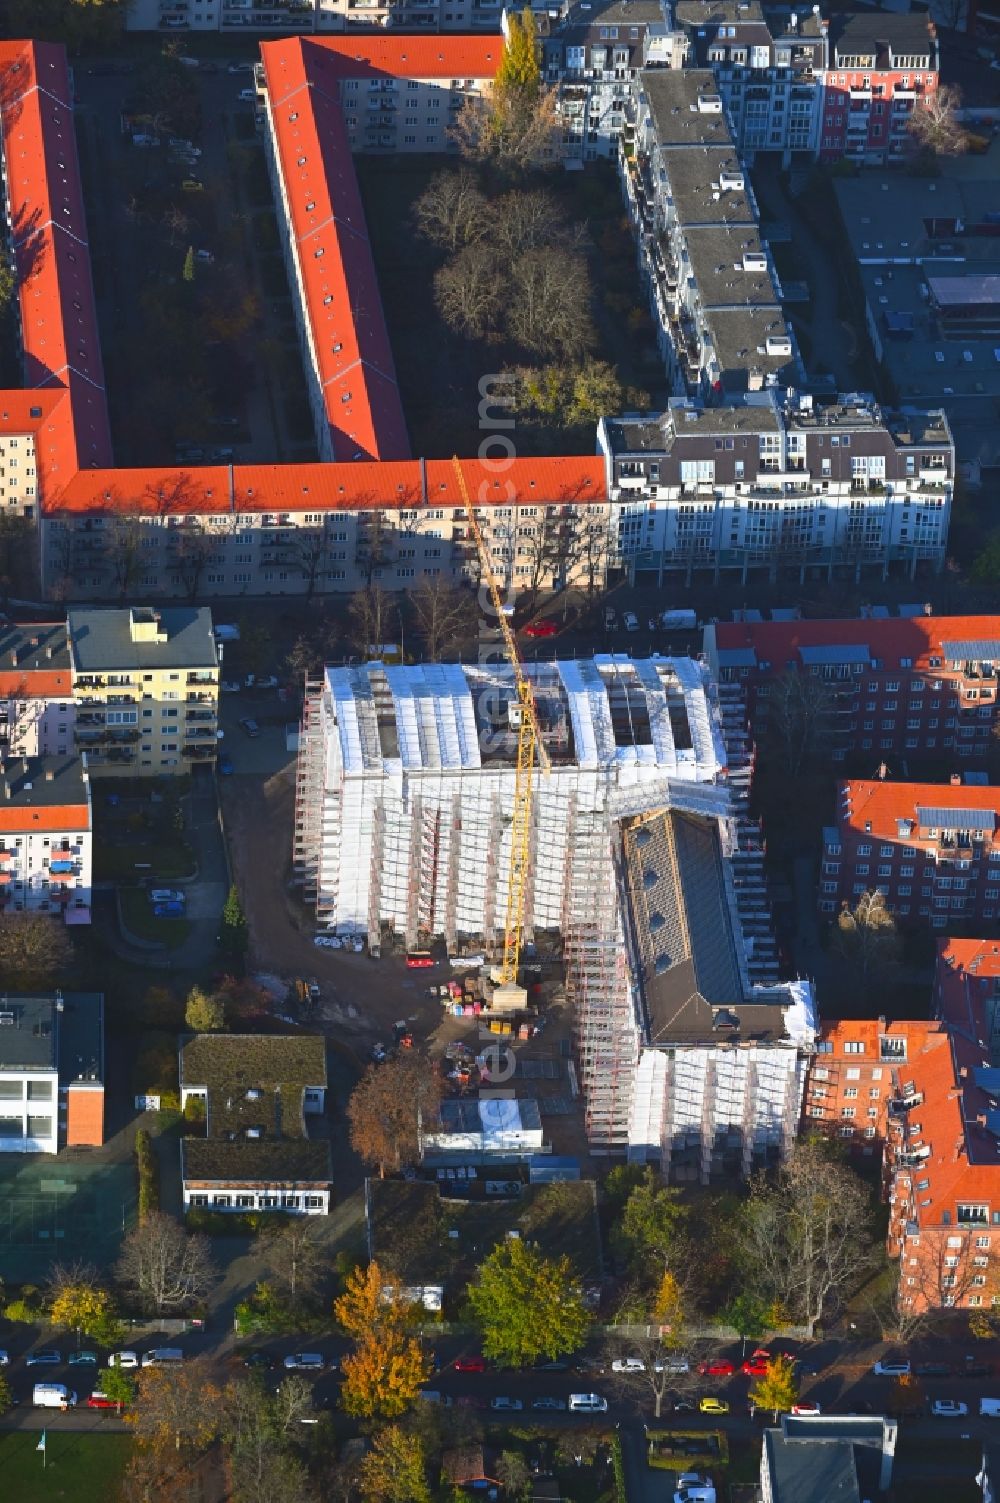 Aerial photograph Berlin - New construction site of the school building Luise-Henriette-Gymnasium on Germaniastrasse - Goetzstrasse in the district Tempelhof in Berlin, Germany